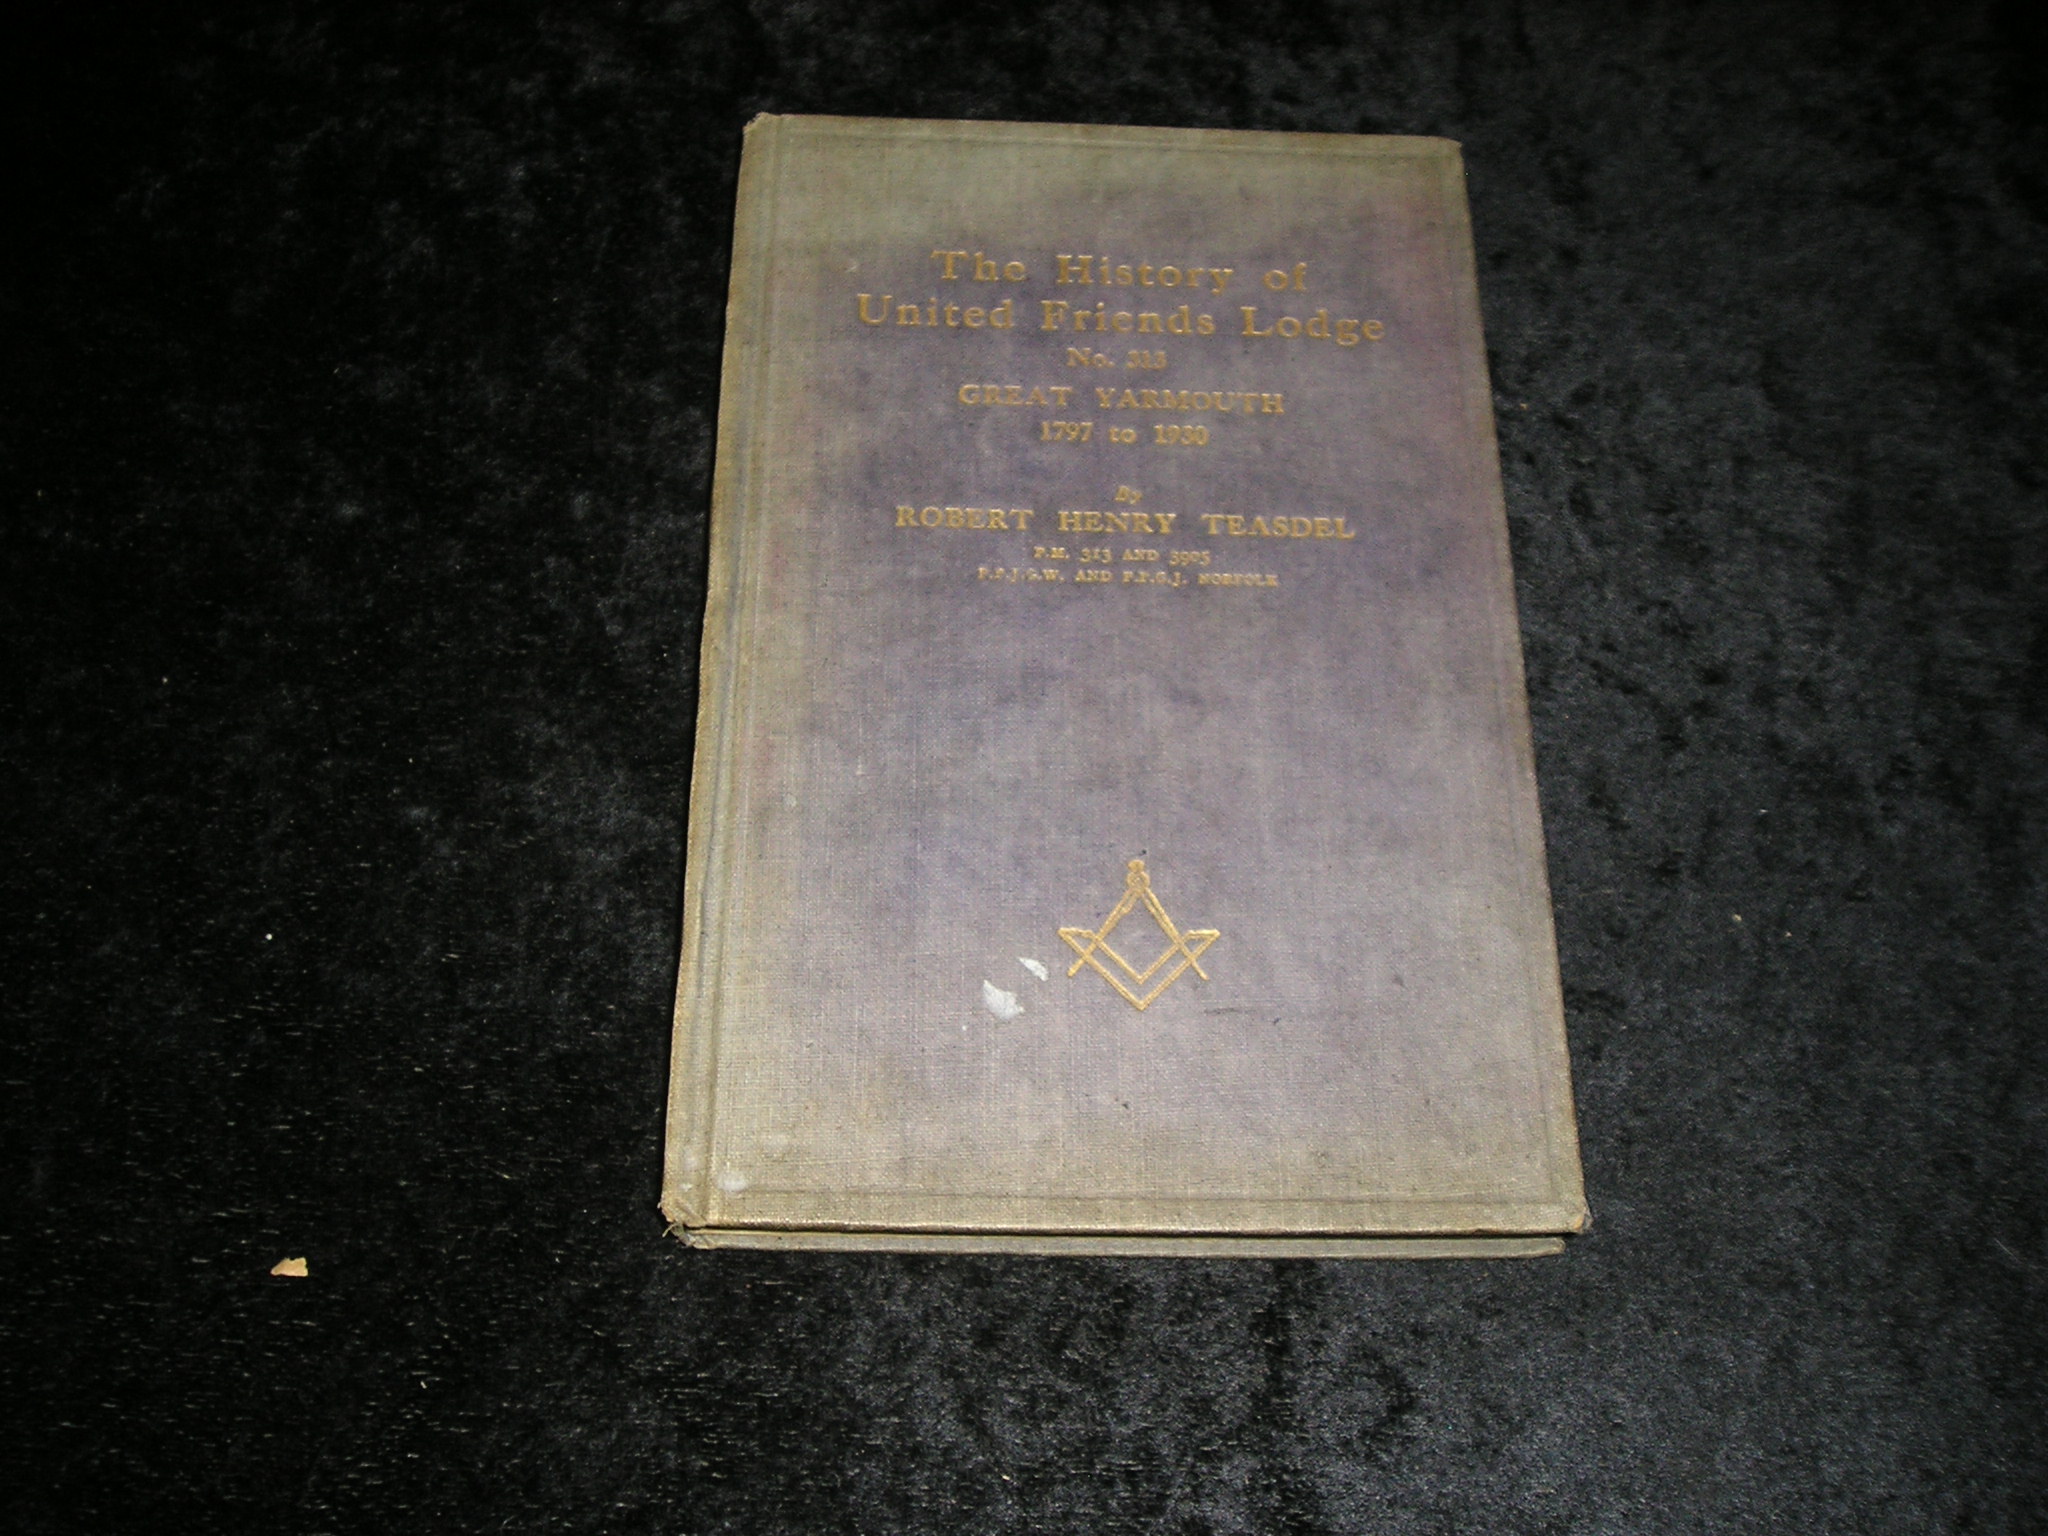 Image 0 of The History of United Friends Lodge No 313 Great Yarmouth 1797 to 1930